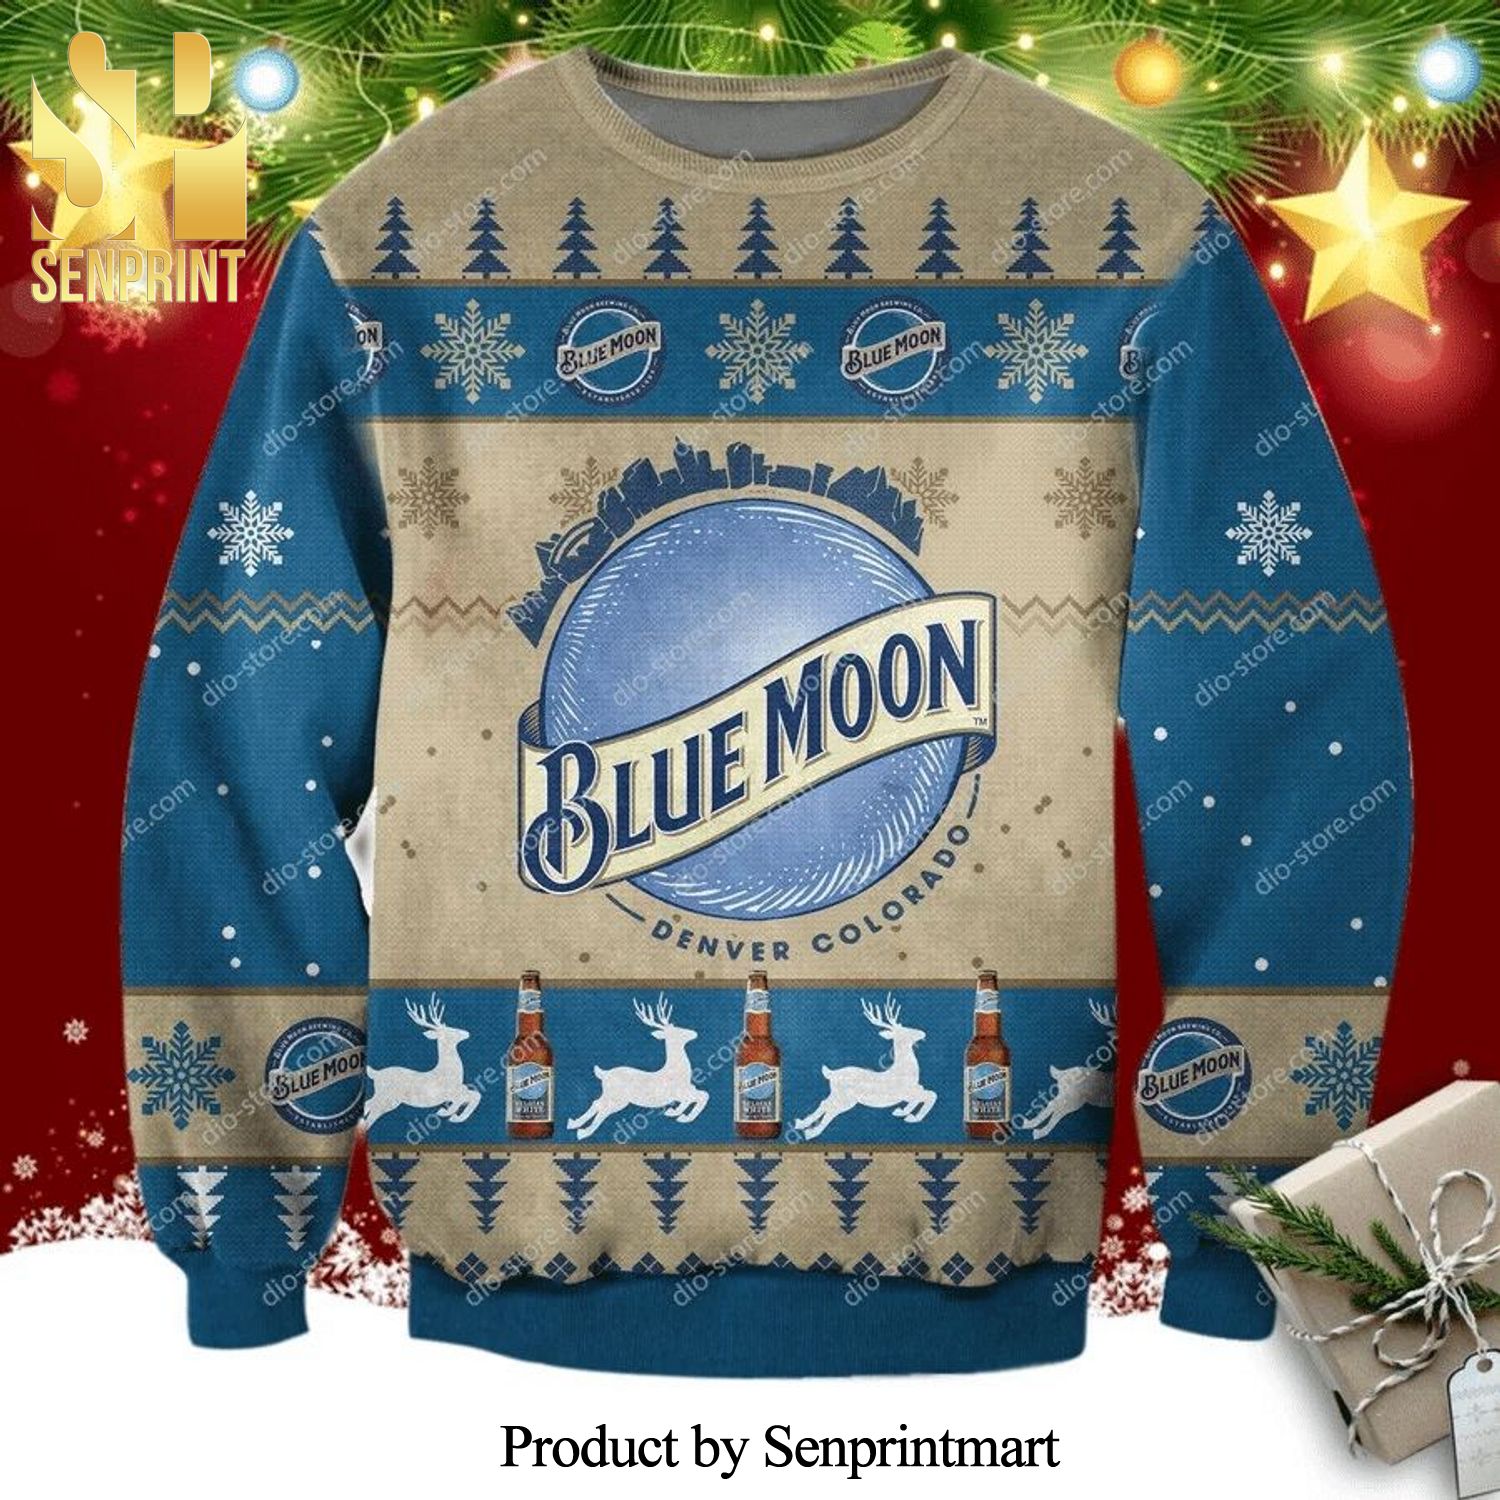 Blue Moon Beer Knitted Ugly Christmas Sweater